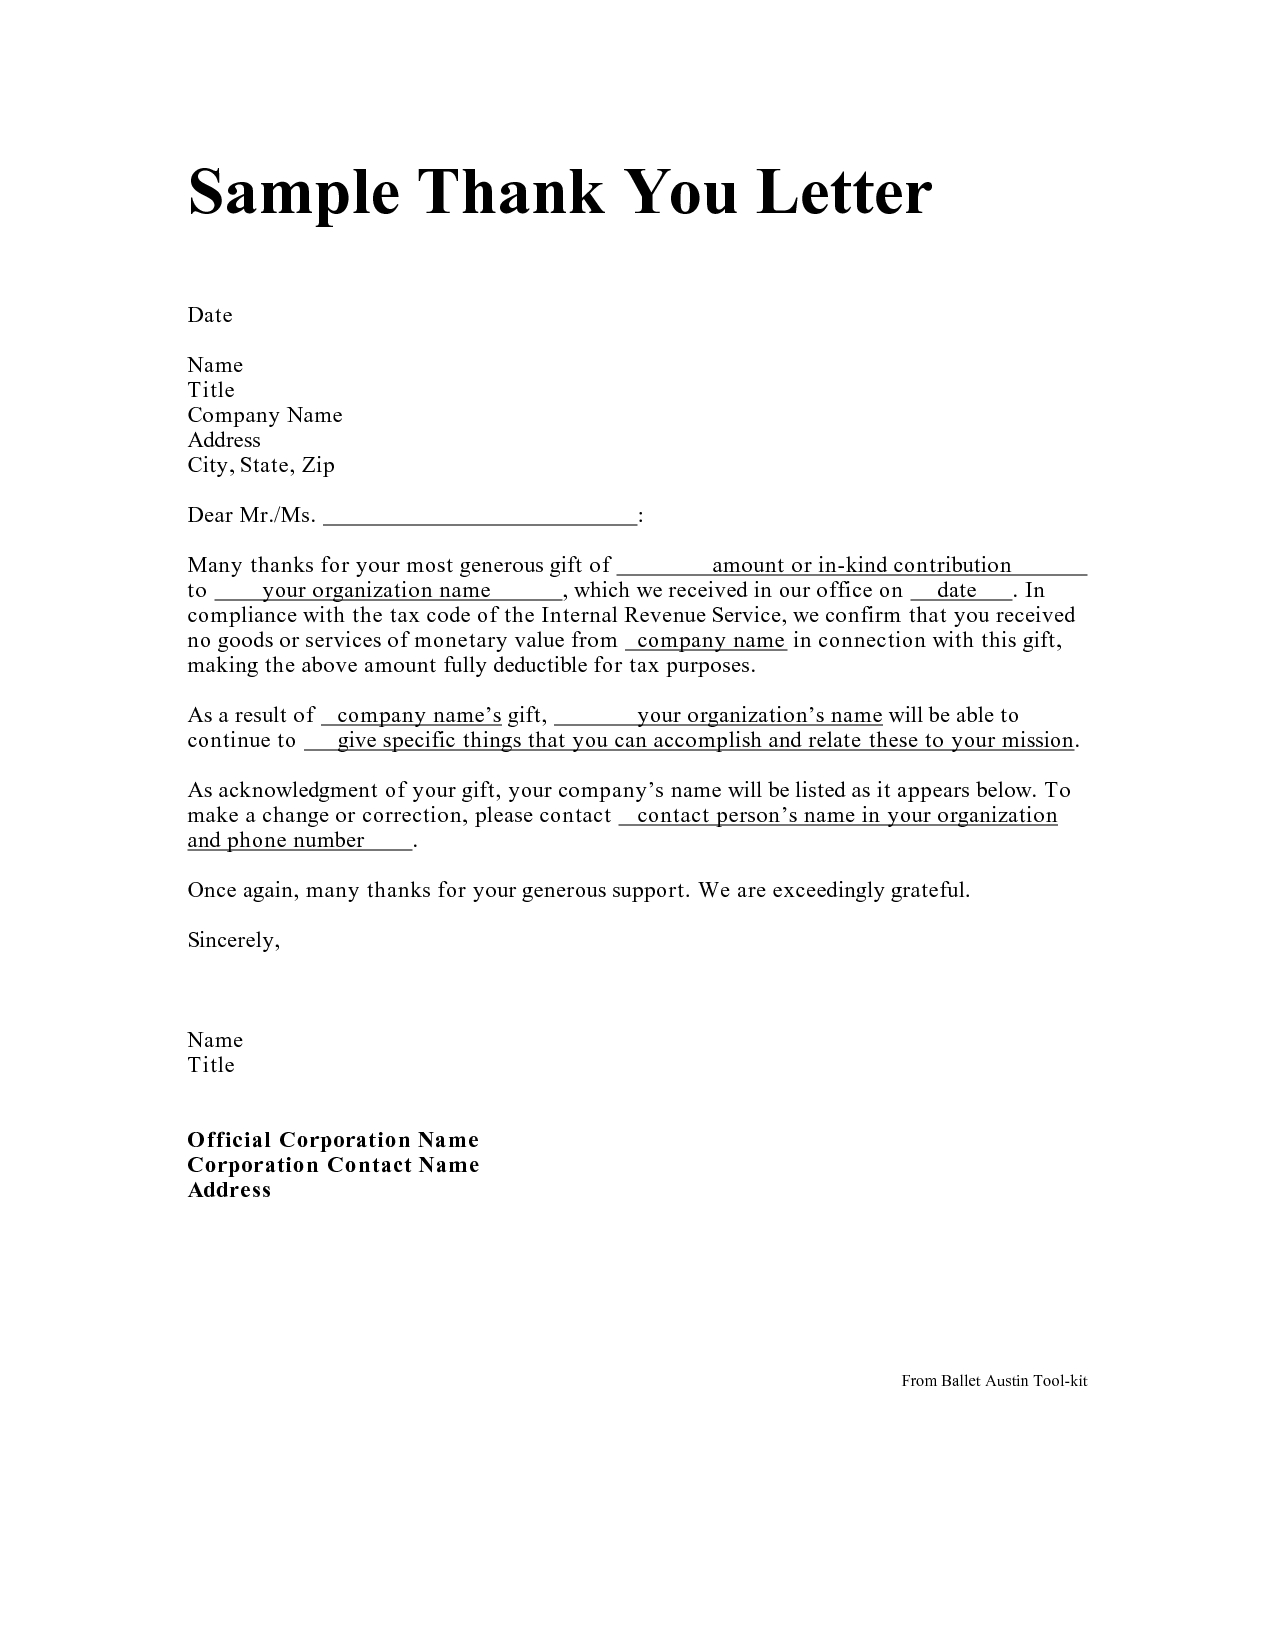 Donor Thank You Letter Template - Personal Thank You Letter Personal Thank You Letter Samples